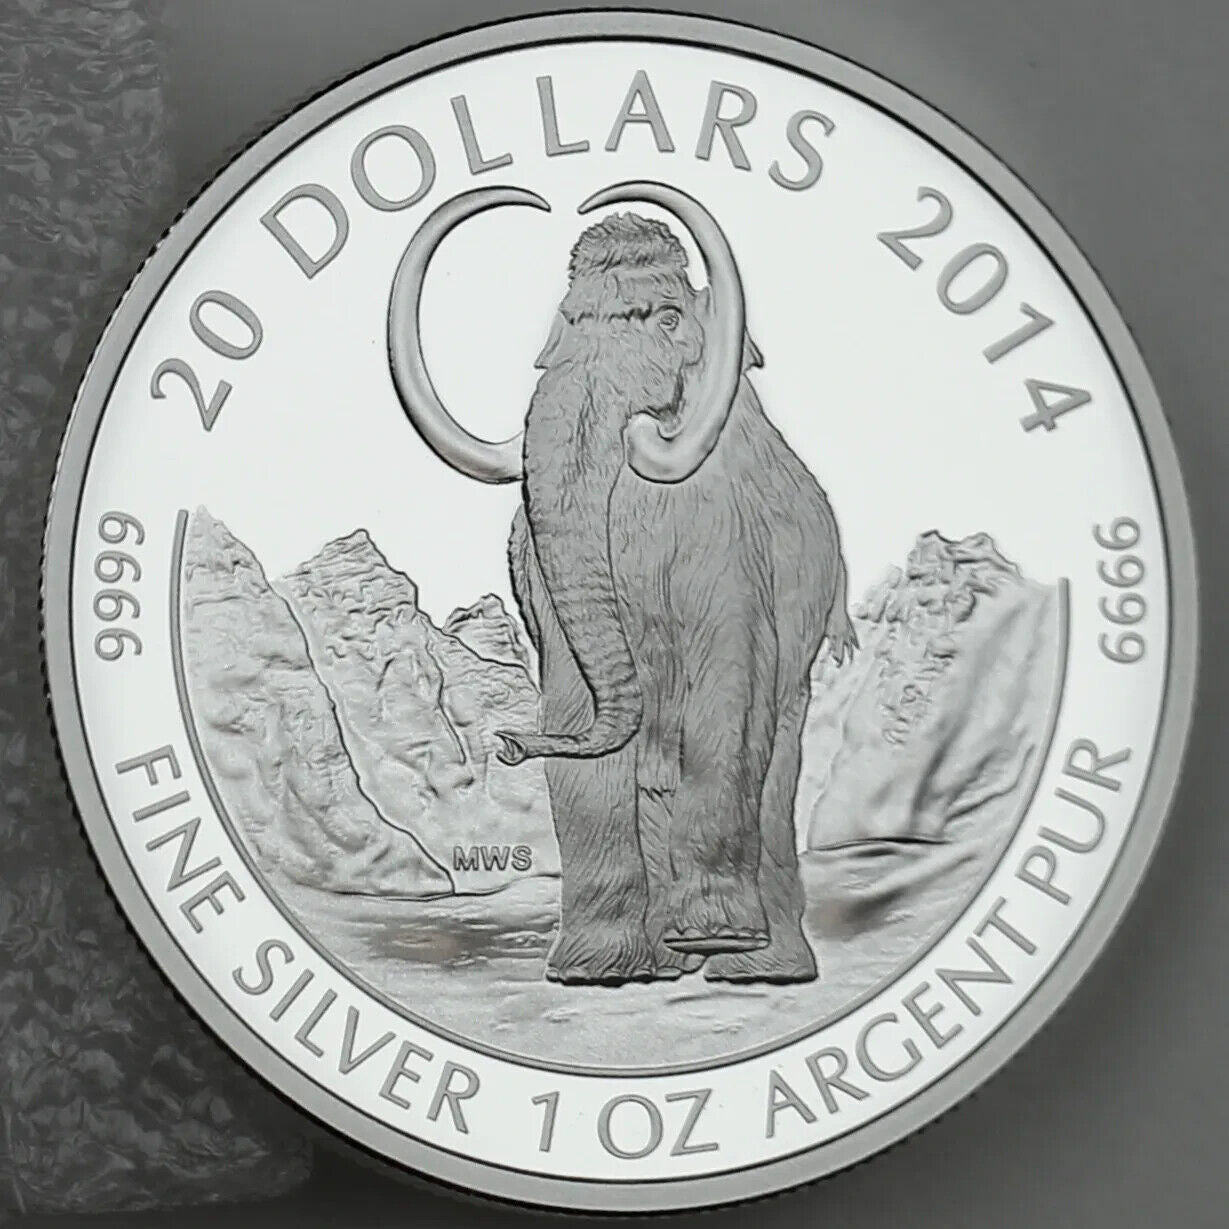 1 Oz Silver Coin 2014 $20 Proof Prehistoric Animals: The Woolly Mammoth-classypw.com-1